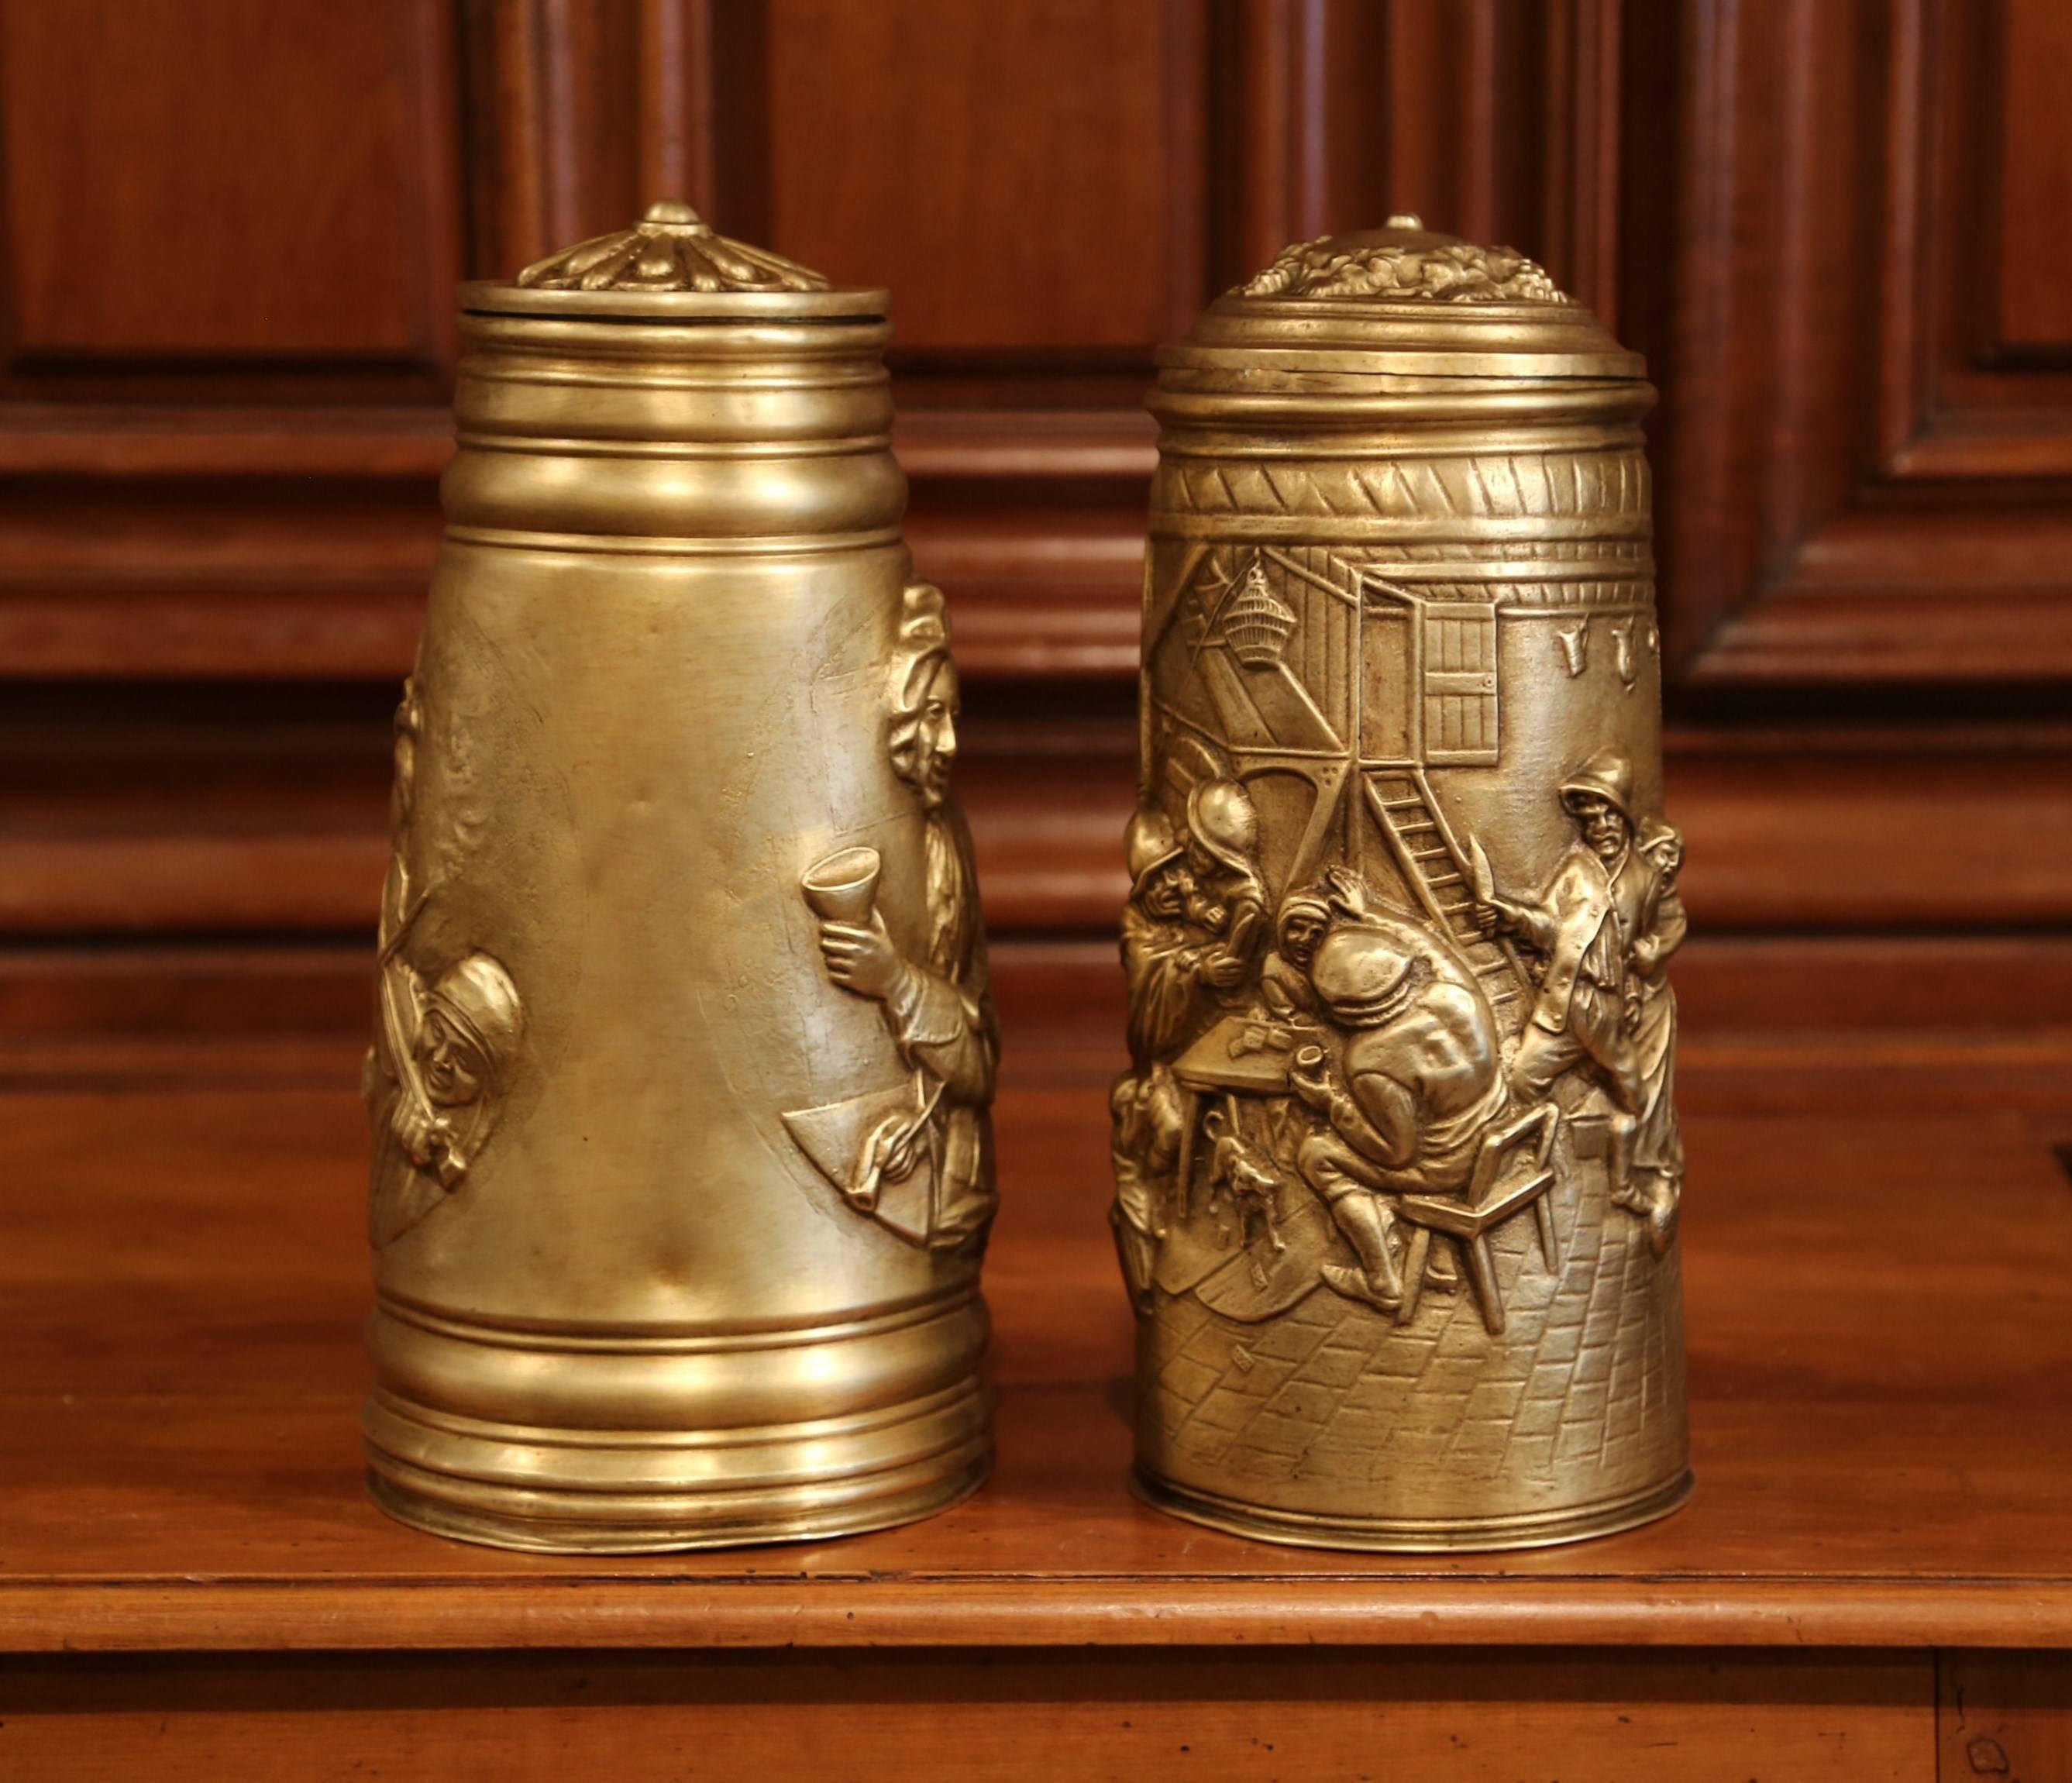 Belgian Pair of 19th Century Belgium Brass Beer Pitchers with Lid and Repousse Decor